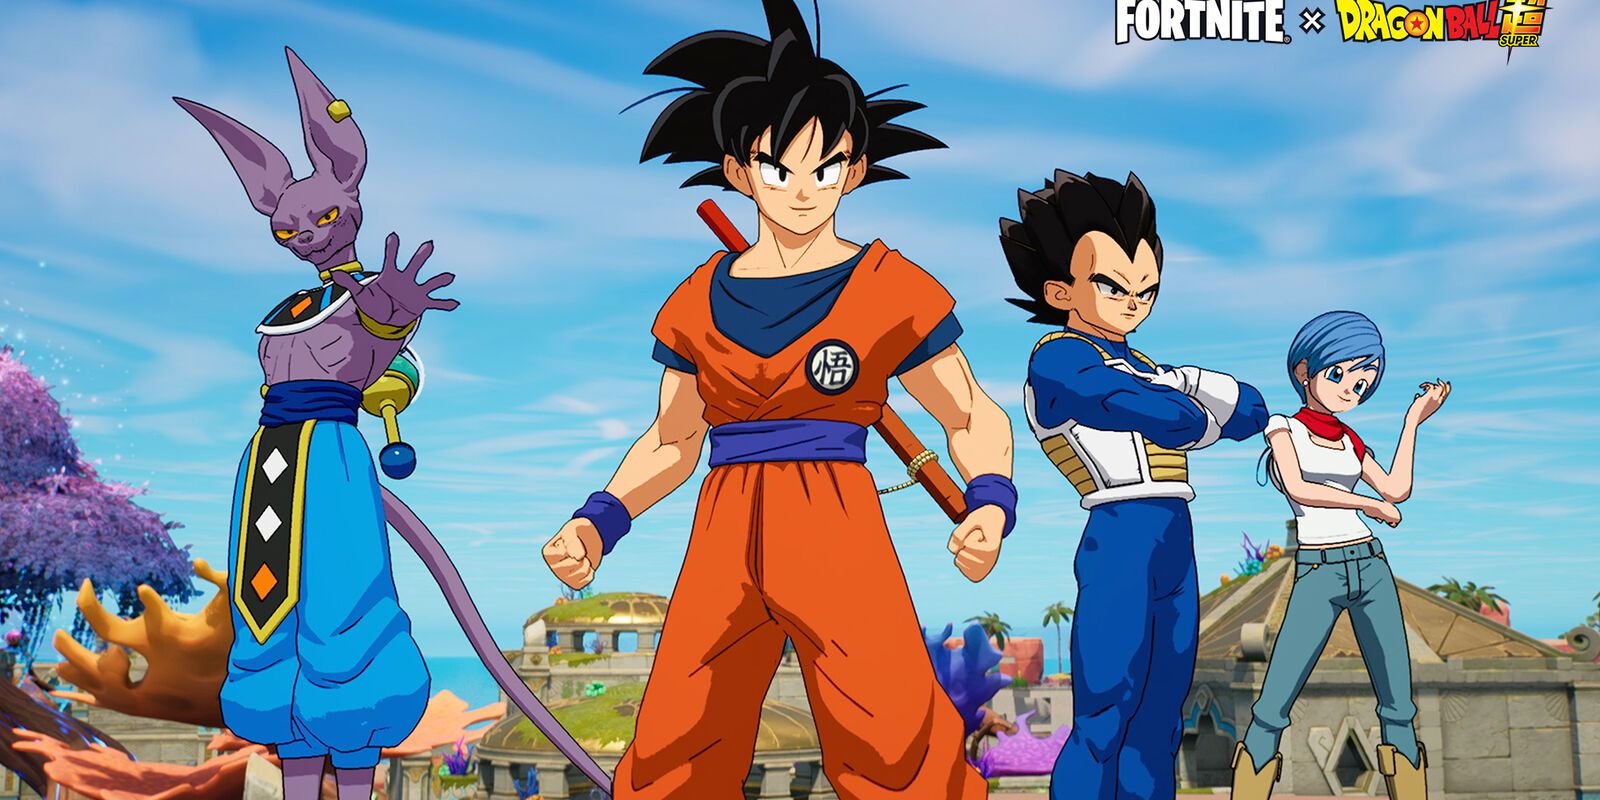 Promo image from the Fortnite Dragon Ball crossover event